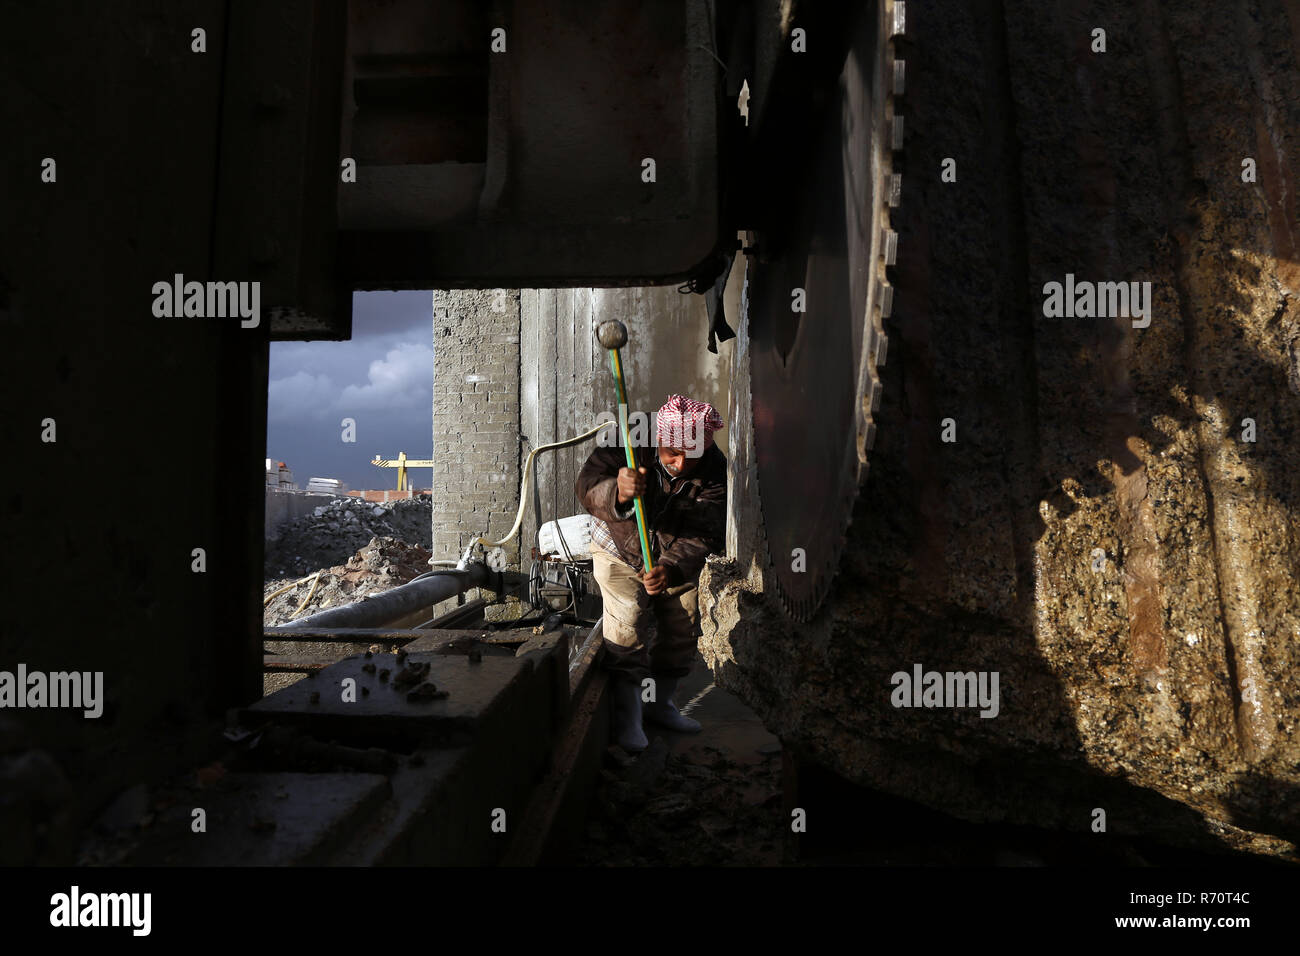 Cairo, Egypt. 6th Dec, 2018. A man works in a marble and granite factory in Cairo, Egypt, on Dec. 6, 2018. In Shaq al-Thu'ban vast marble and granite industrial cluster near Egyptian capital Cairo's Maadi district, about 40 Chinese and Egyptian cooperative granite factories and 30 marble factories have significantly contributed to boosting the industry in the most populous Arab country. Credit: Ahmed Gomaa/Xinhua/Alamy Live News Stock Photo